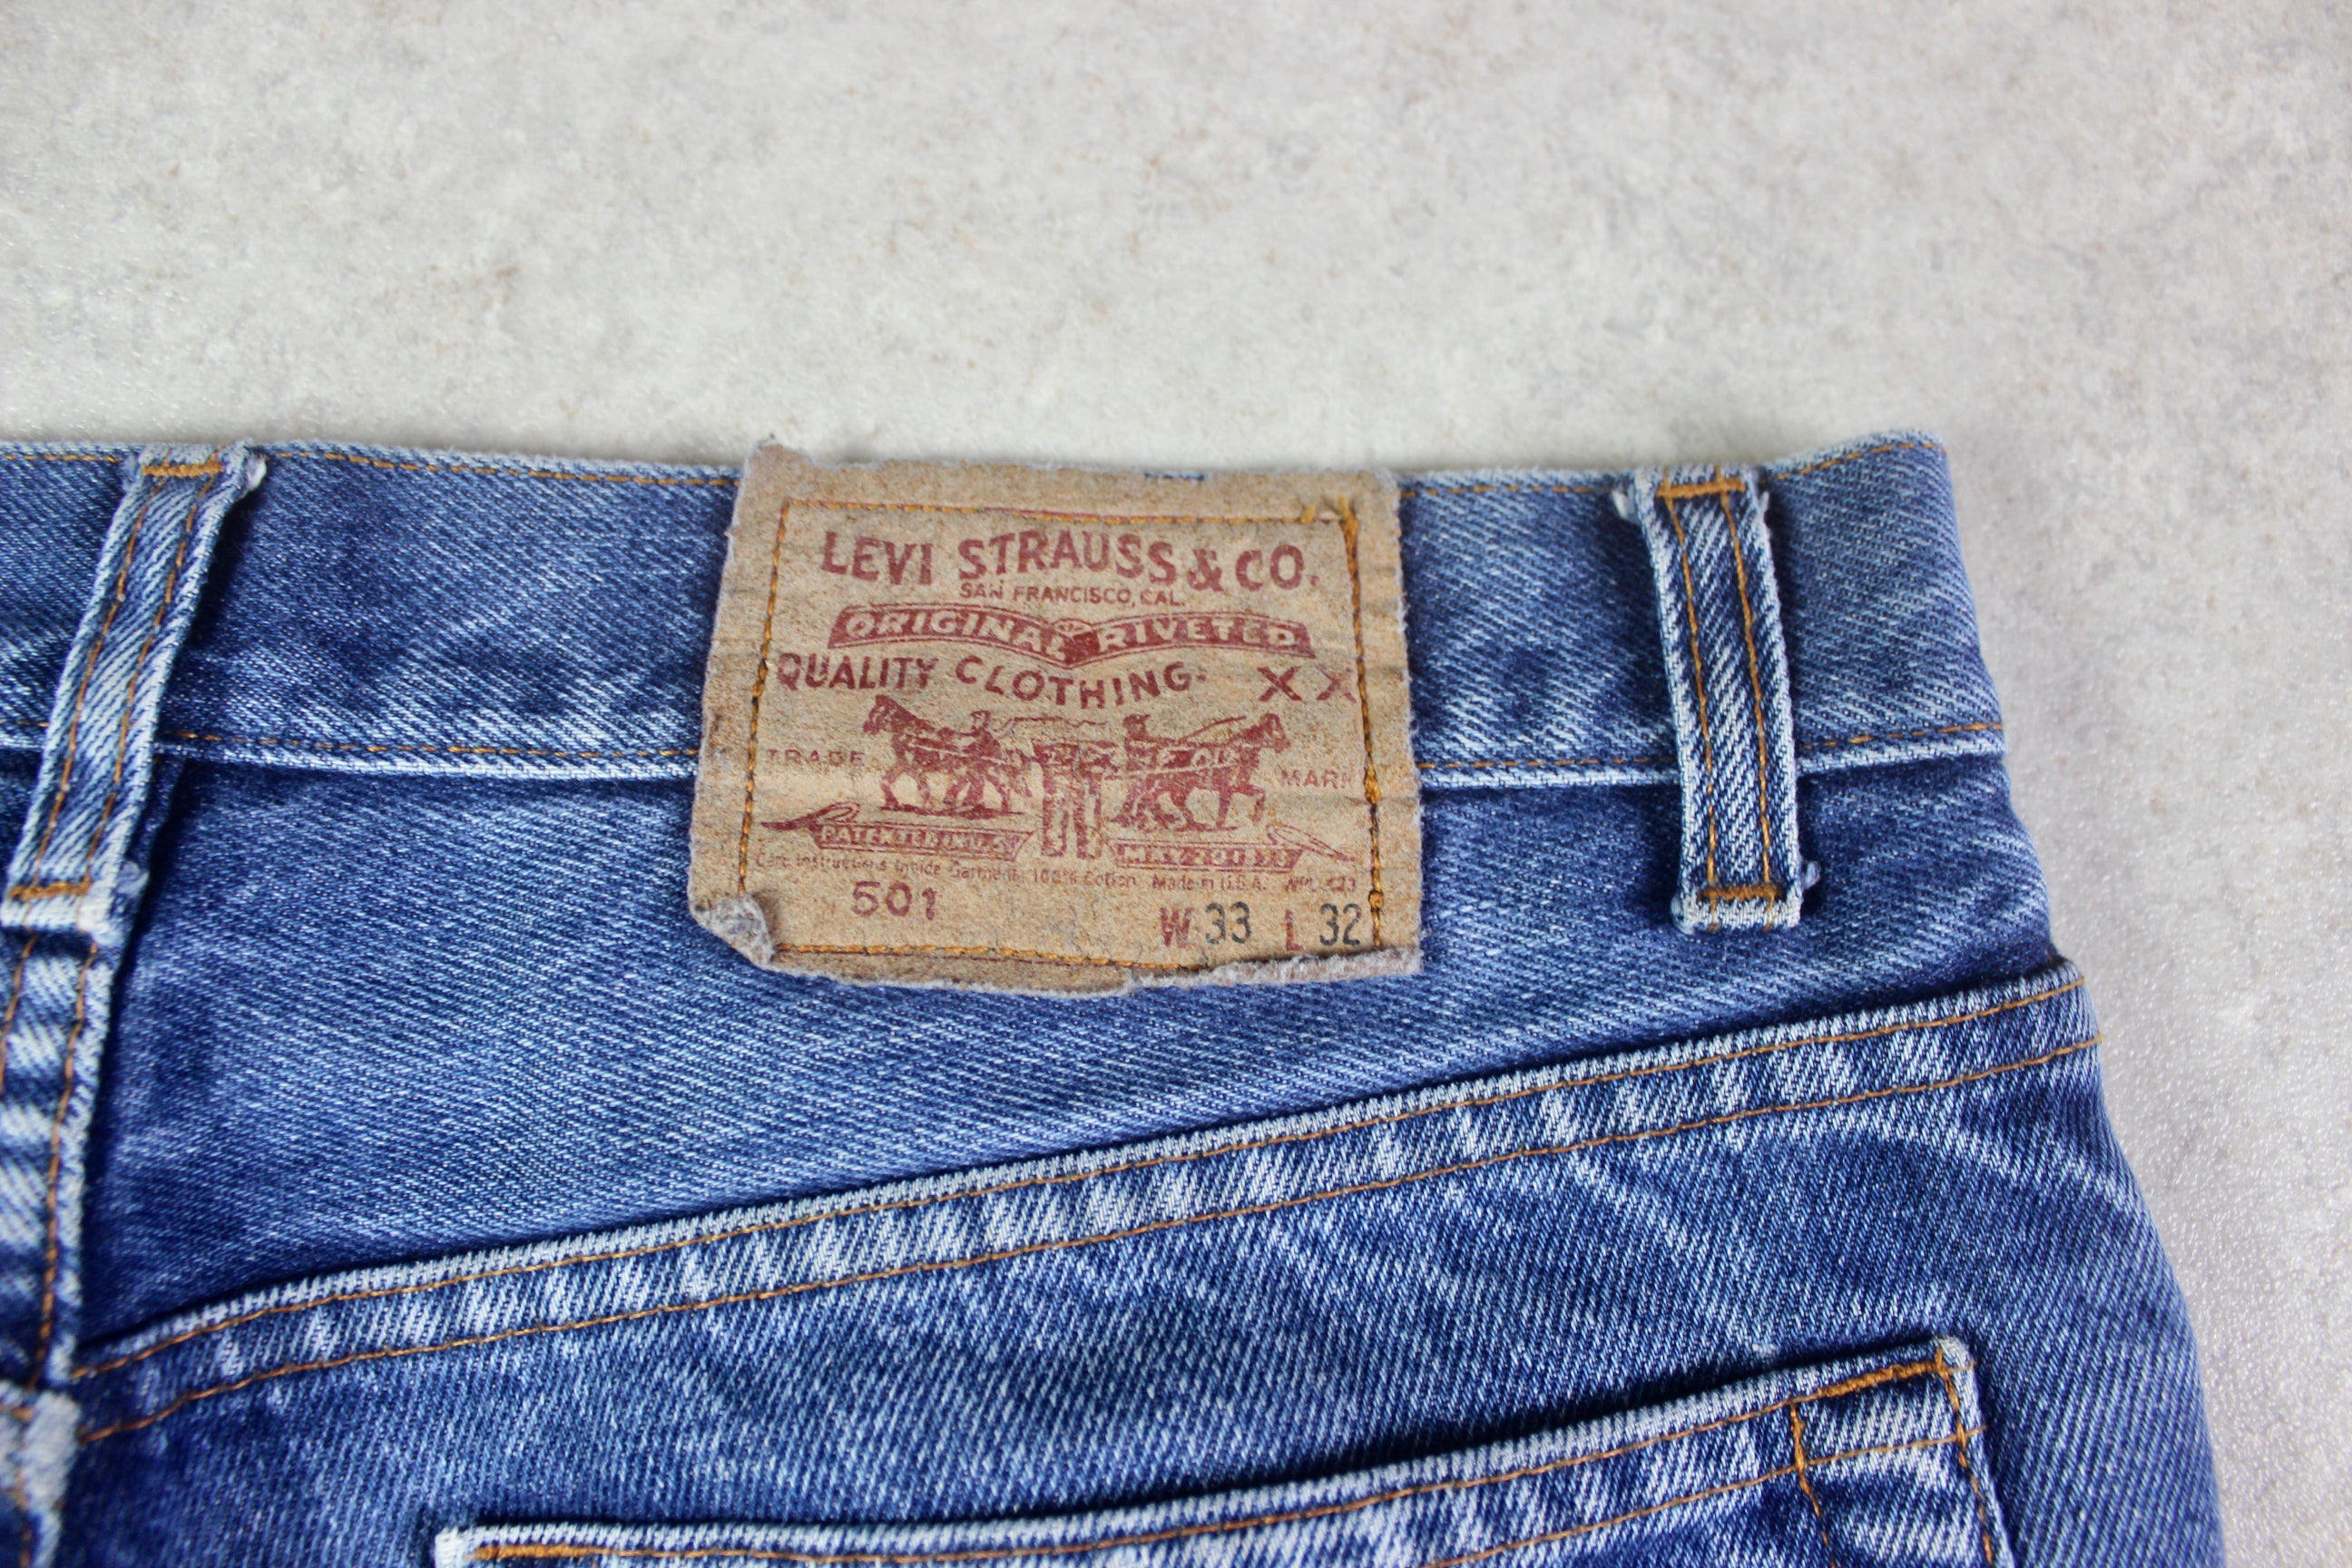 Levi's - Vintage Big E 501 Made in USA Jeans - Blue - 32